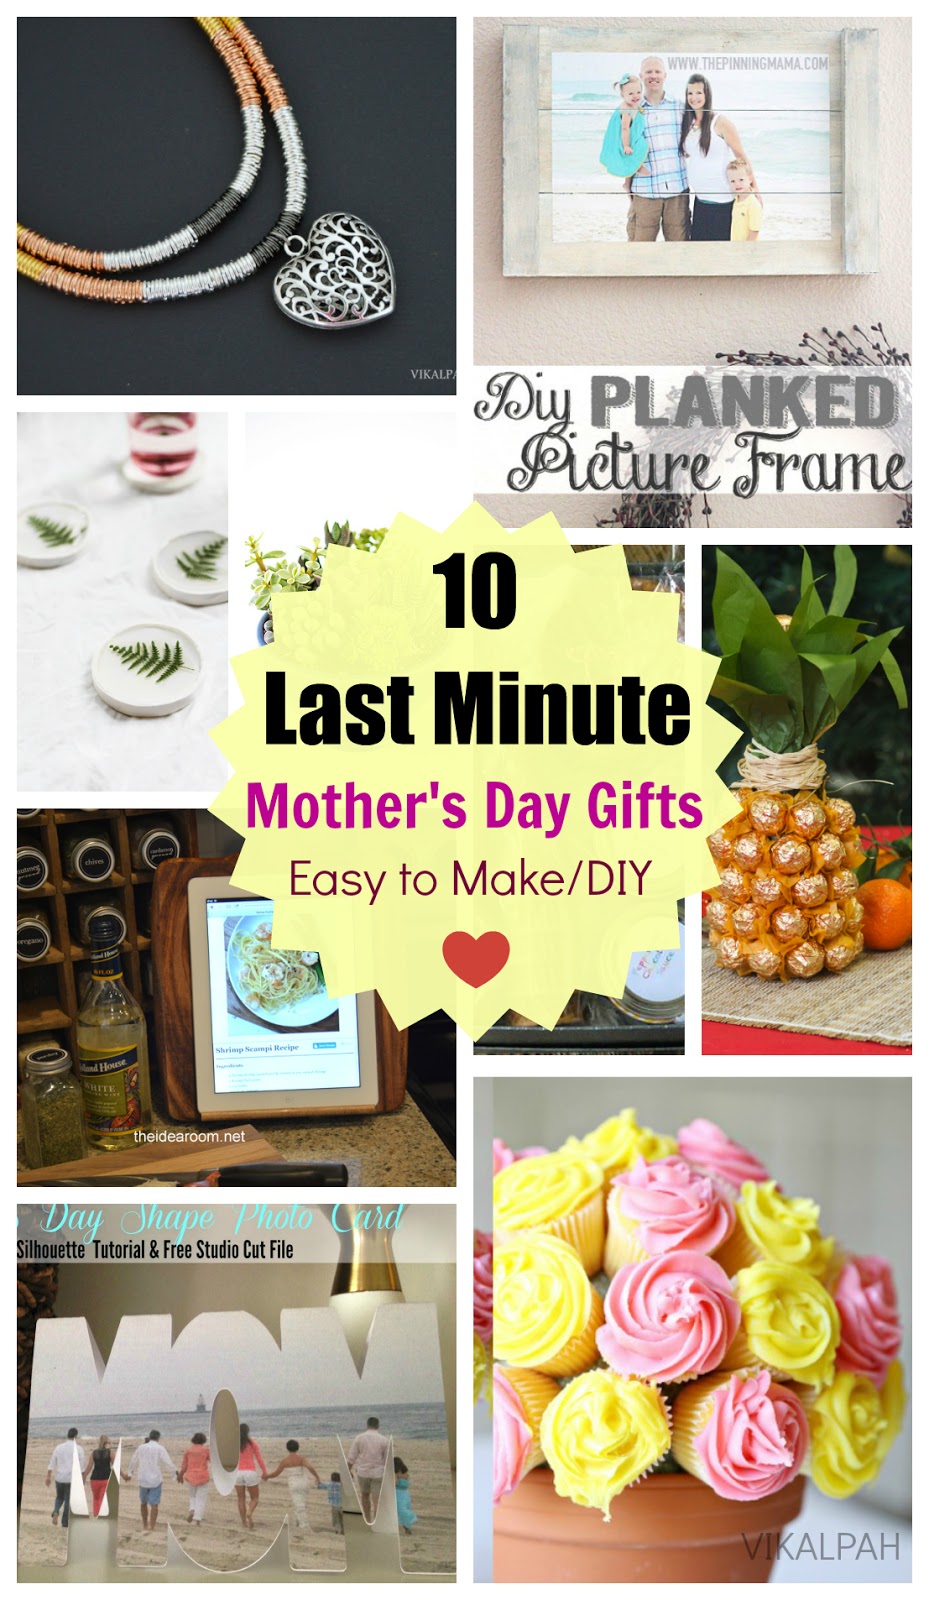 Mother's Day: Cheap, Easy, Thoughtful Last Minute Gifts